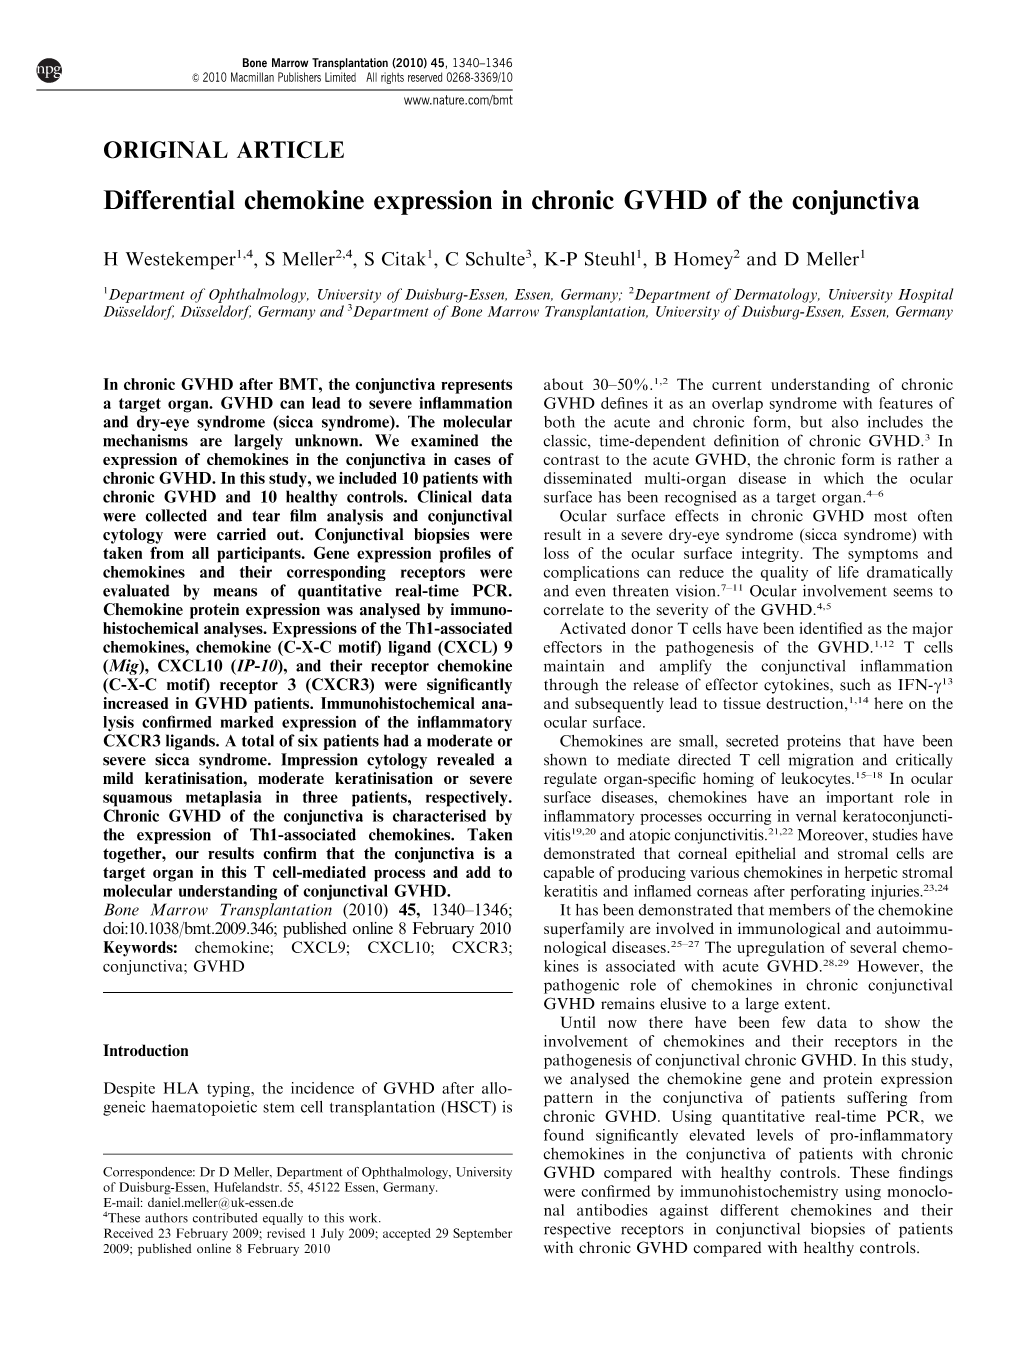 Differential Chemokine Expression in Chronic GVHD of the Conjunctiva